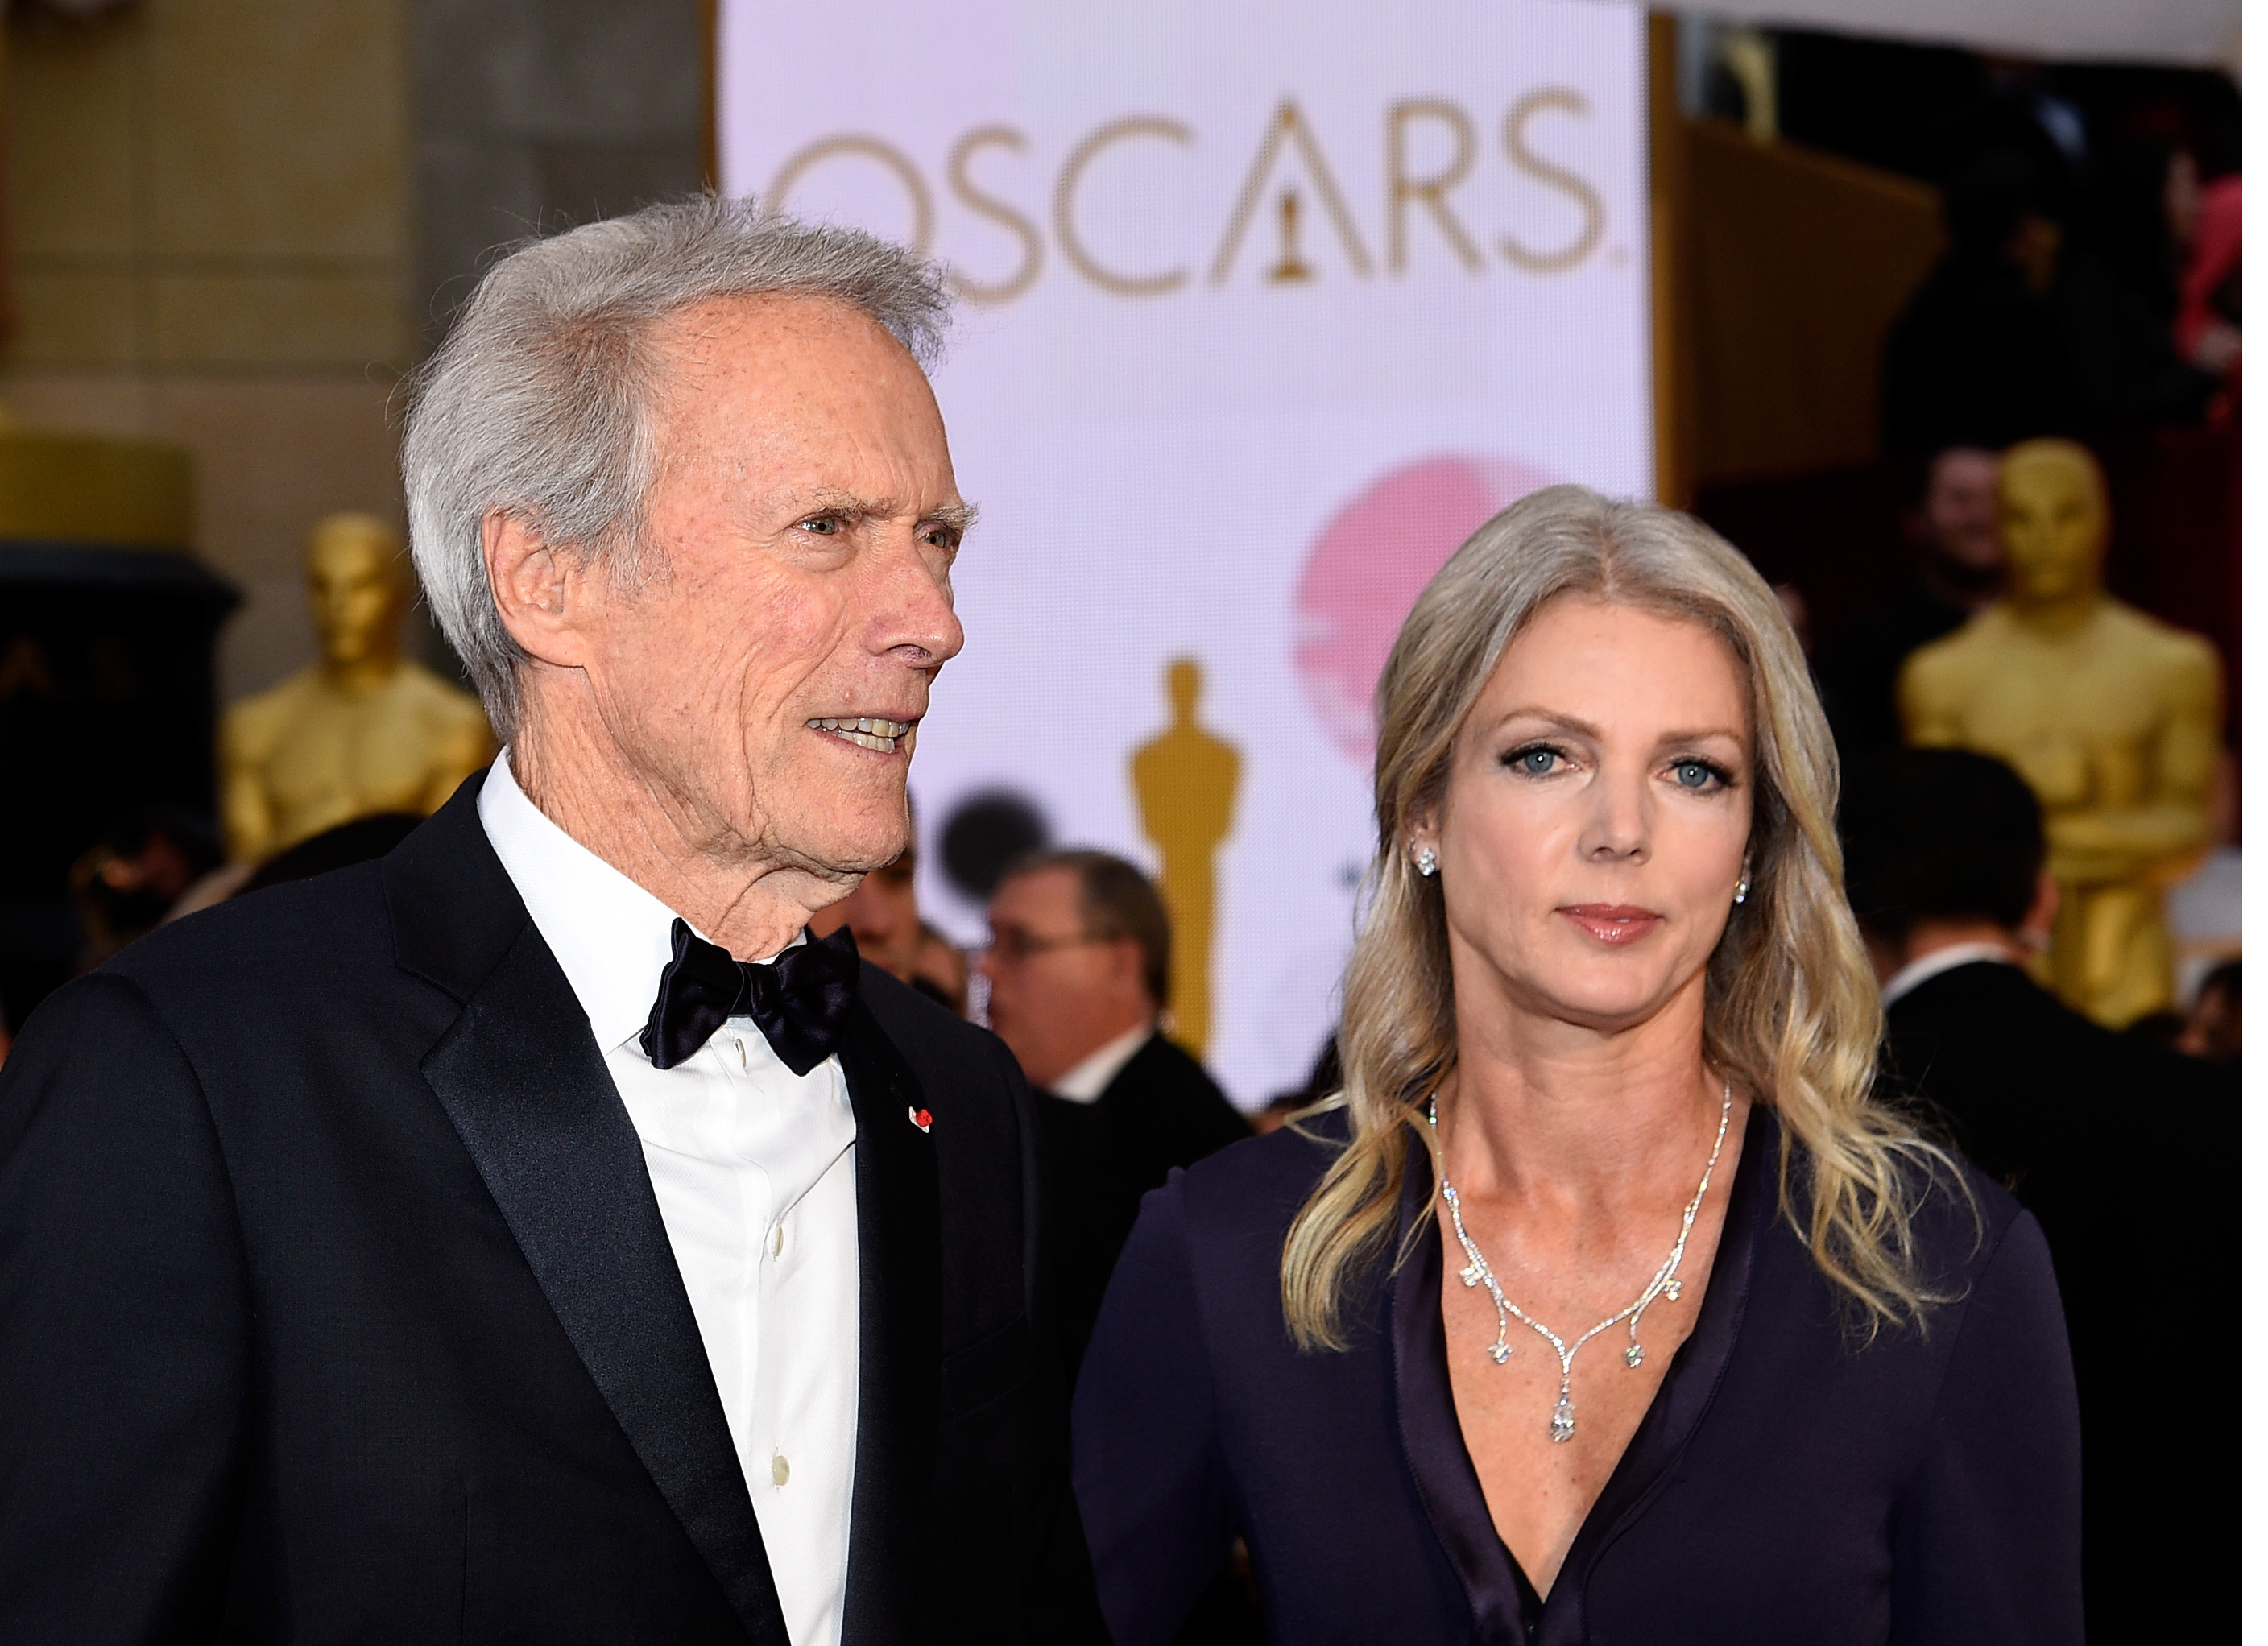 Clint Eastwood and Christina Sandera attend the 87th Annual Academy Awards at Hollywood & Highland Center on February 22, 2015, in Hollywood, California